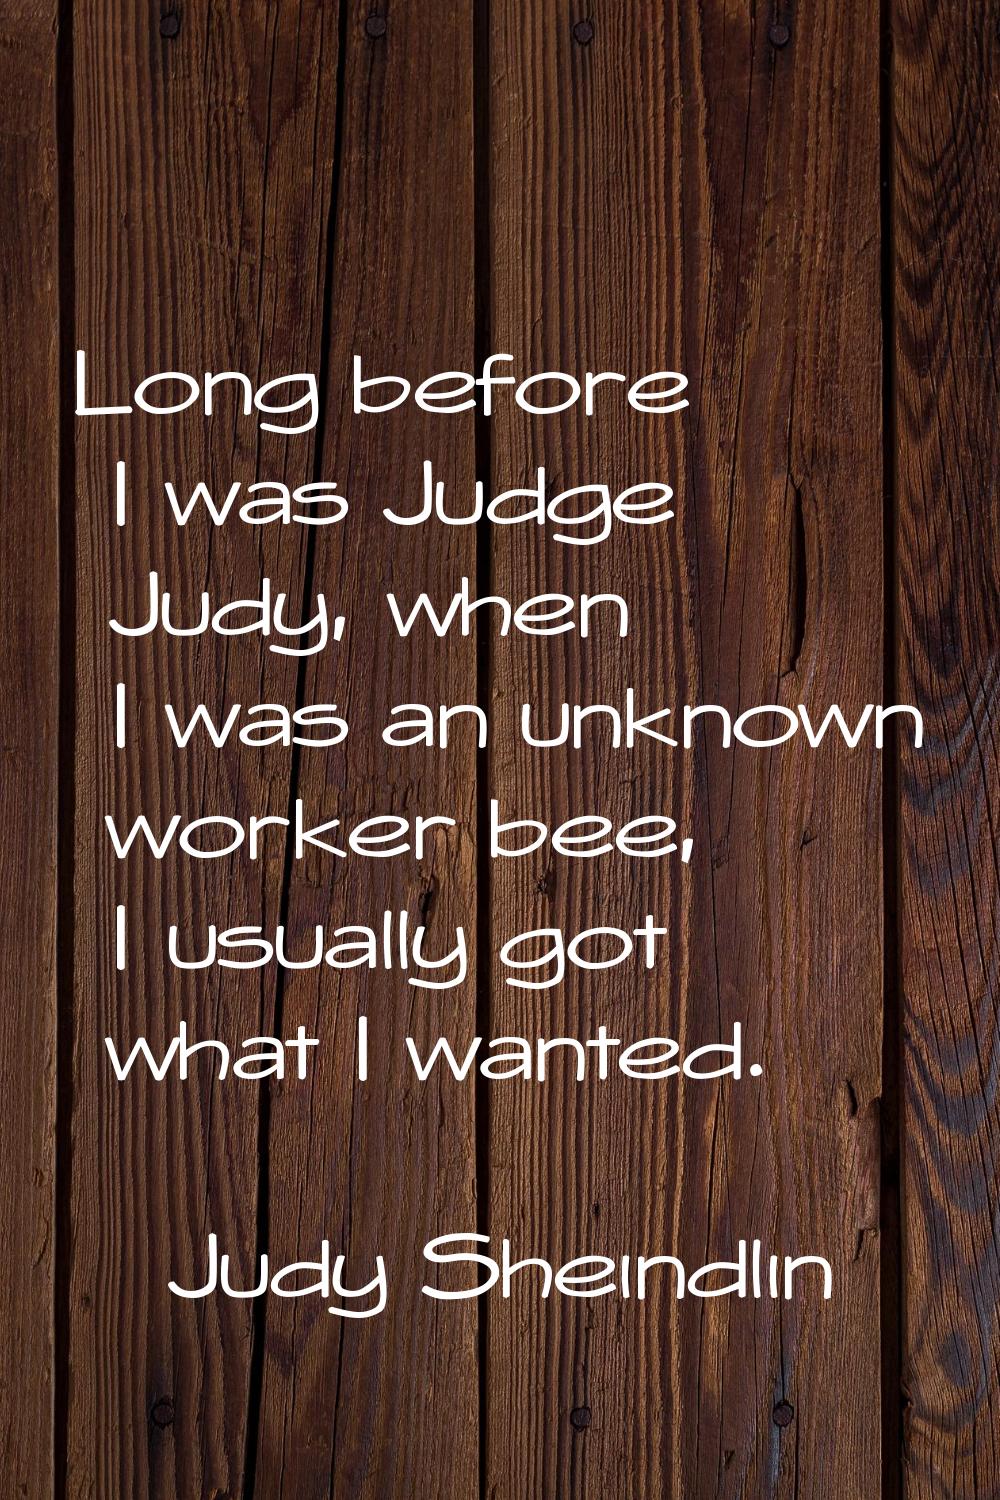 Long before I was Judge Judy, when I was an unknown worker bee, I usually got what I wanted.